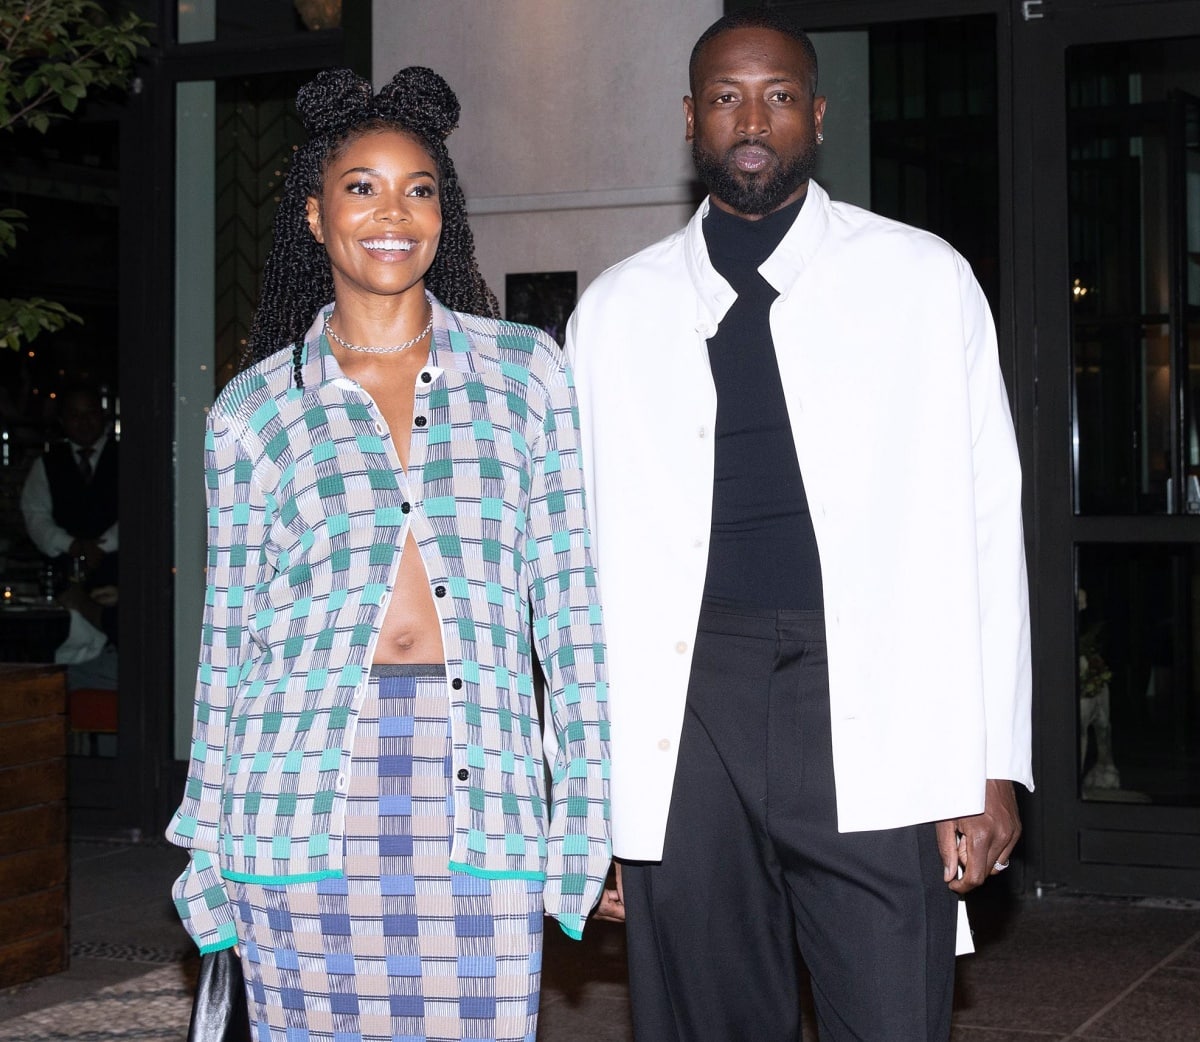 Gabrielle Union with husband Dwyane Wade while out and about in New York City